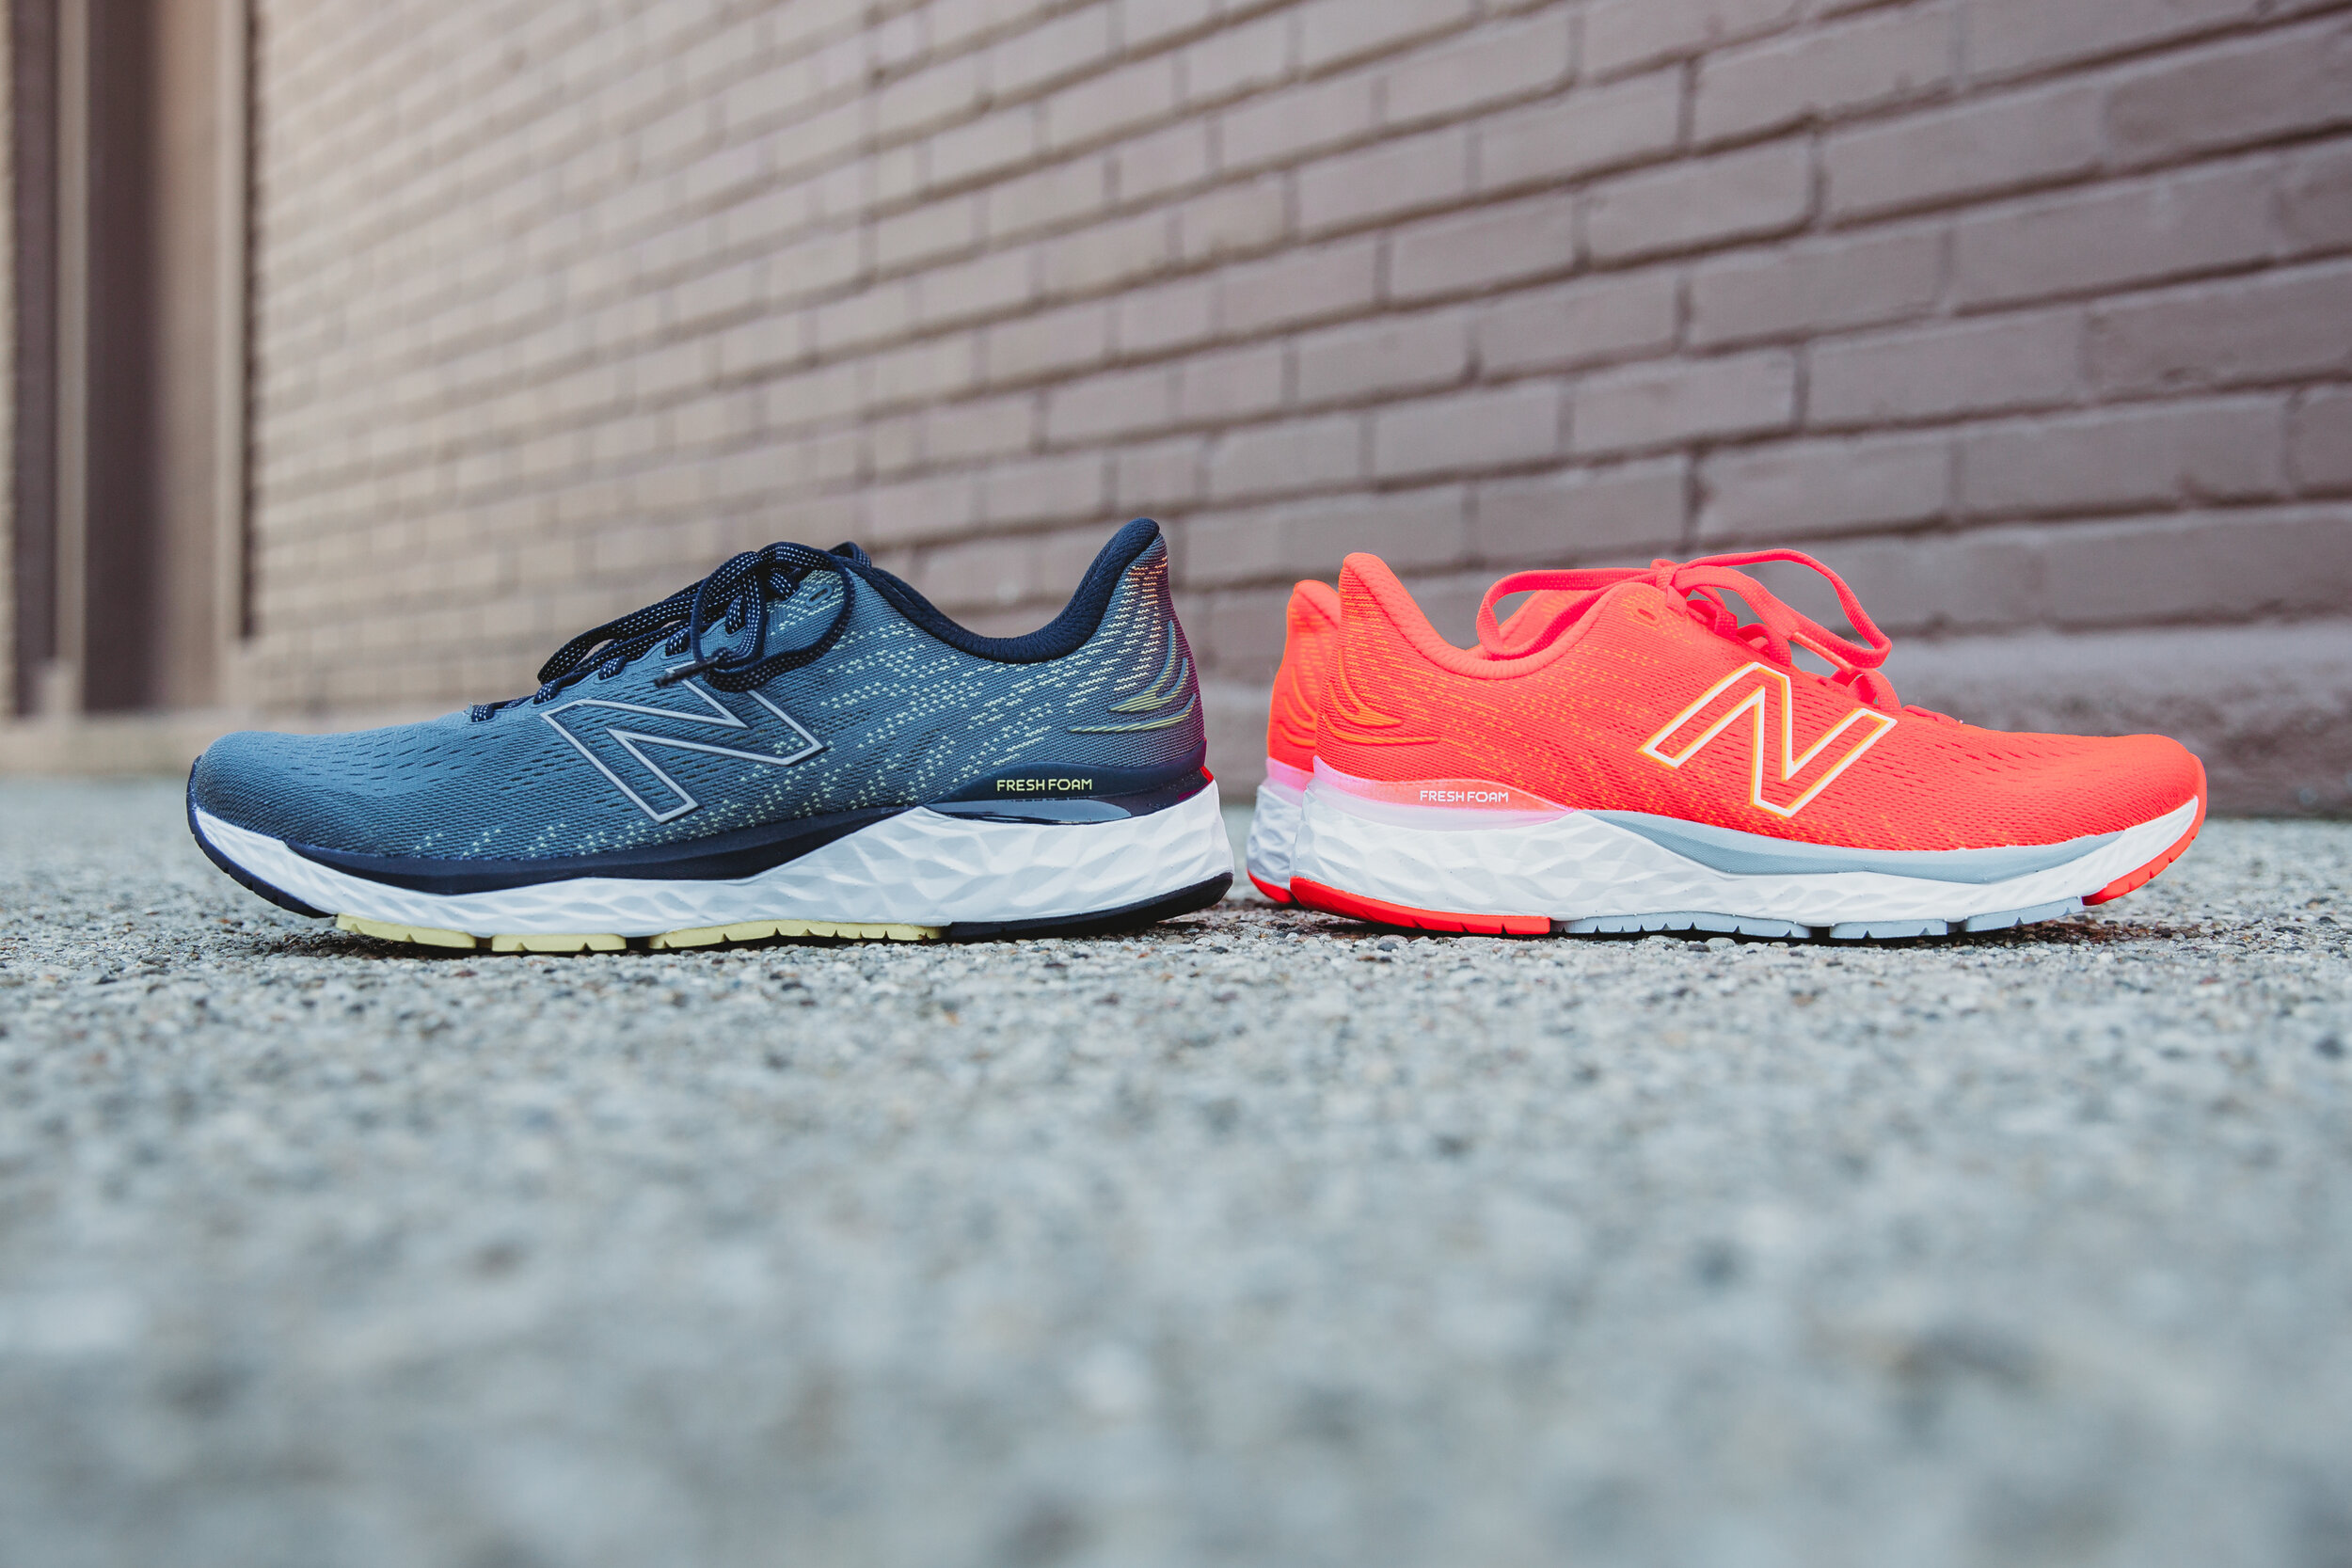 New Balance — Connected Soles